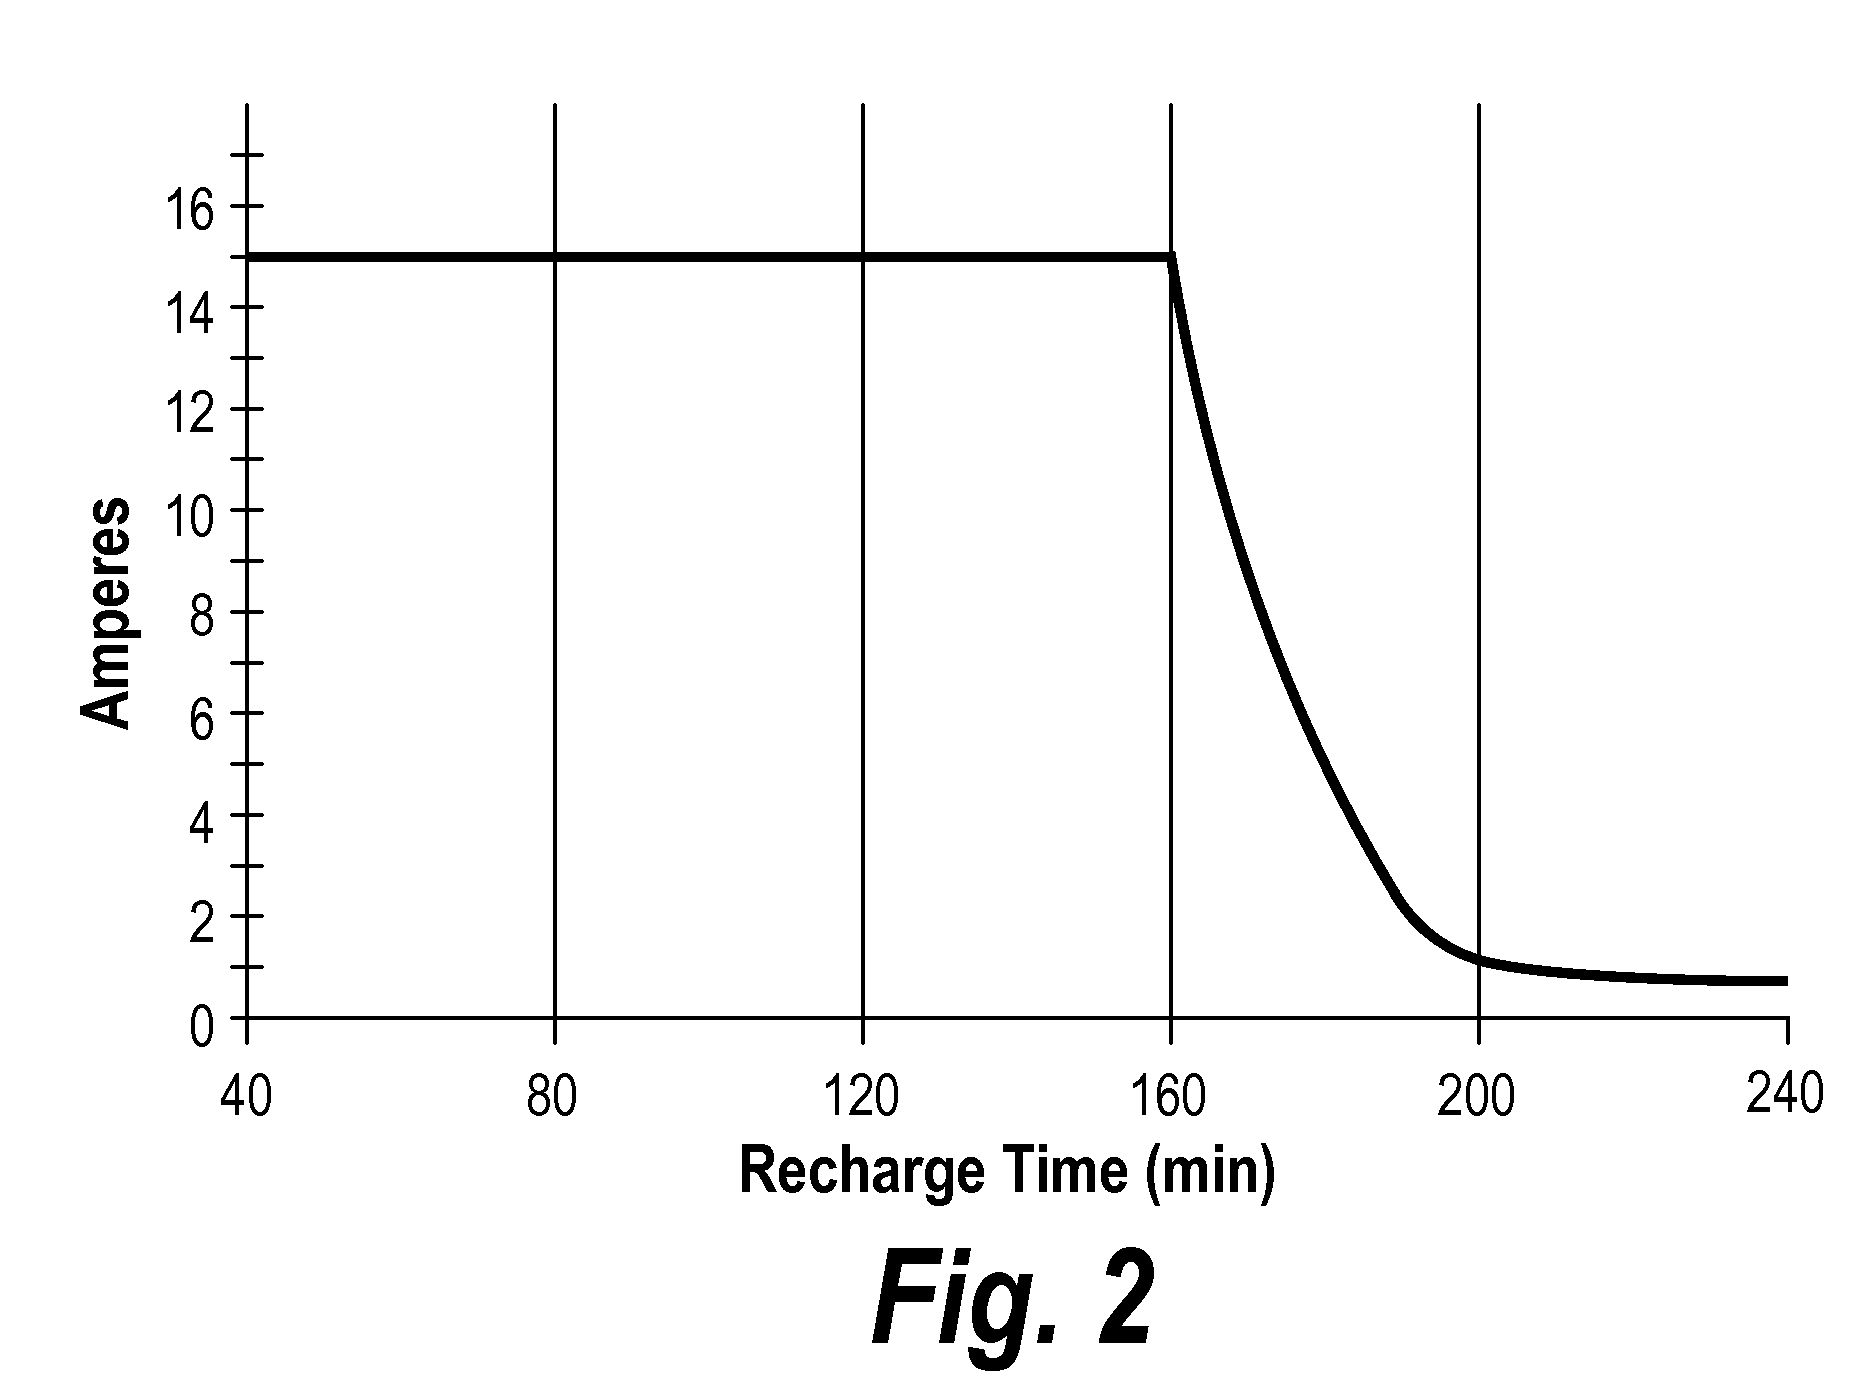 Compositions and delivery systems with leachable metal ions